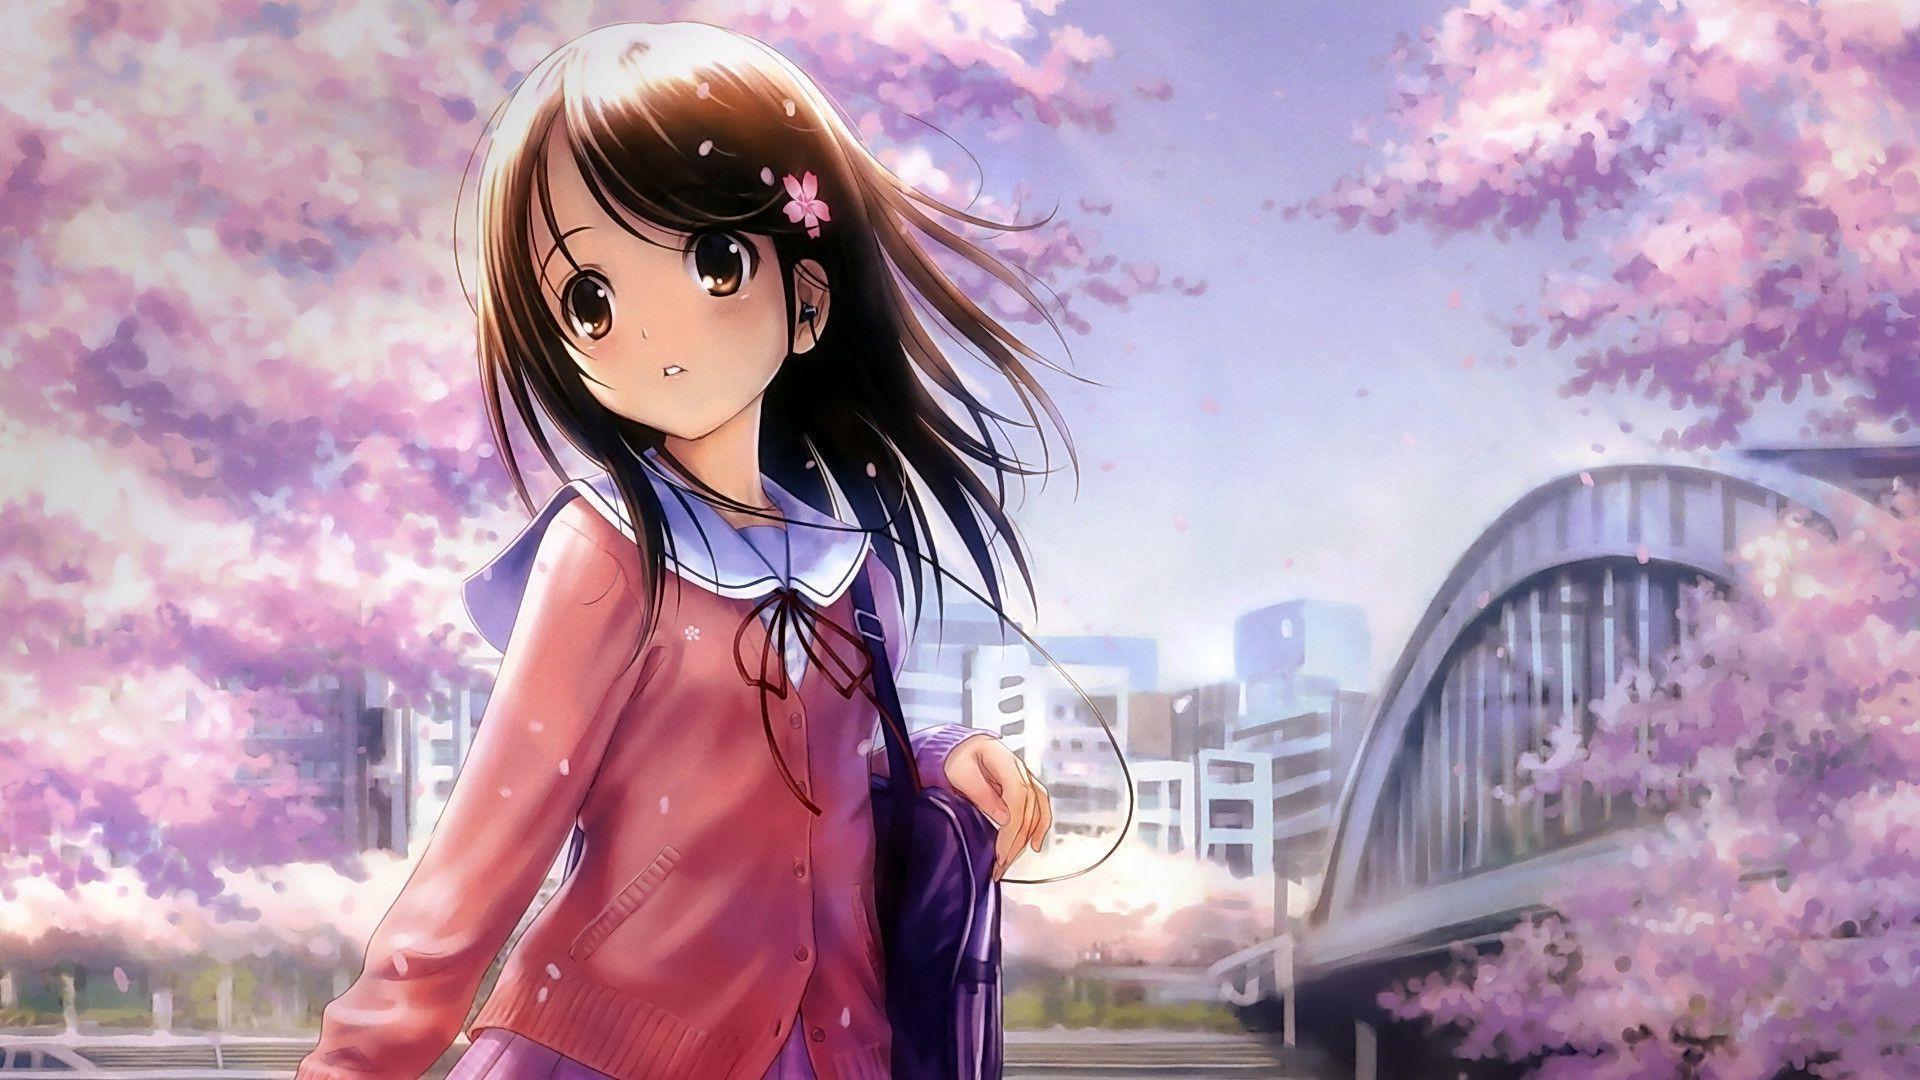 Cute Anime Girl Wallpaper HD:Amazon.com:Appstore for Android